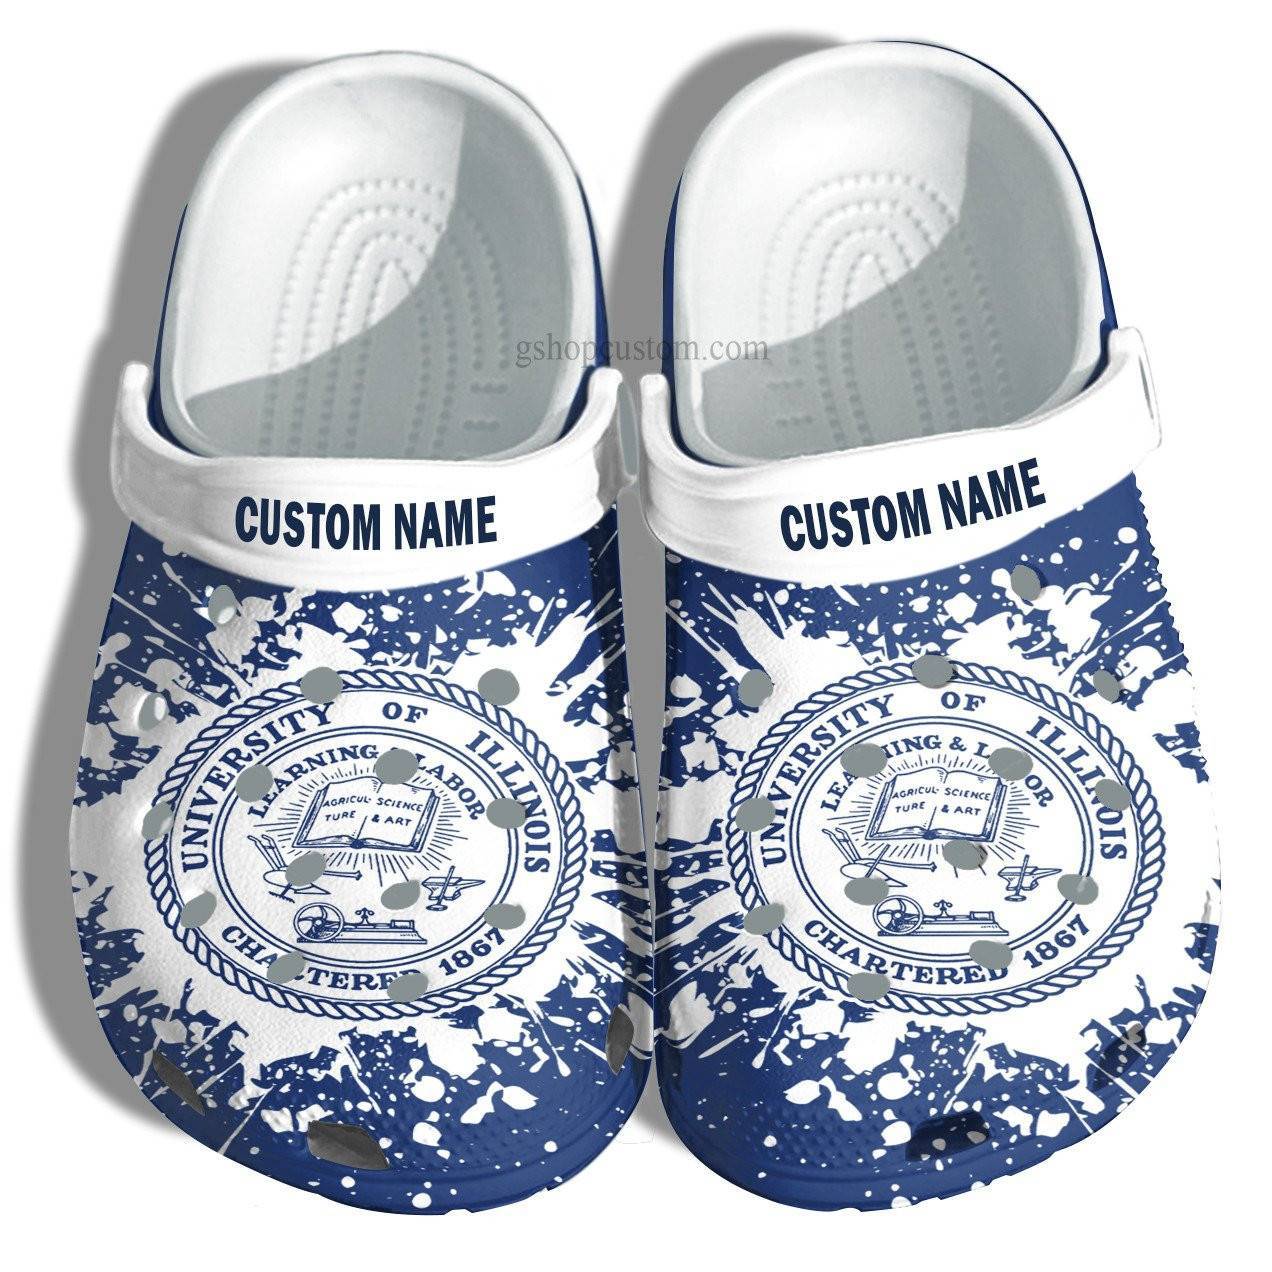 University Of Illinois Graduation Gifts Croc Shoes Customize – Admission Gift Crocss Shoes